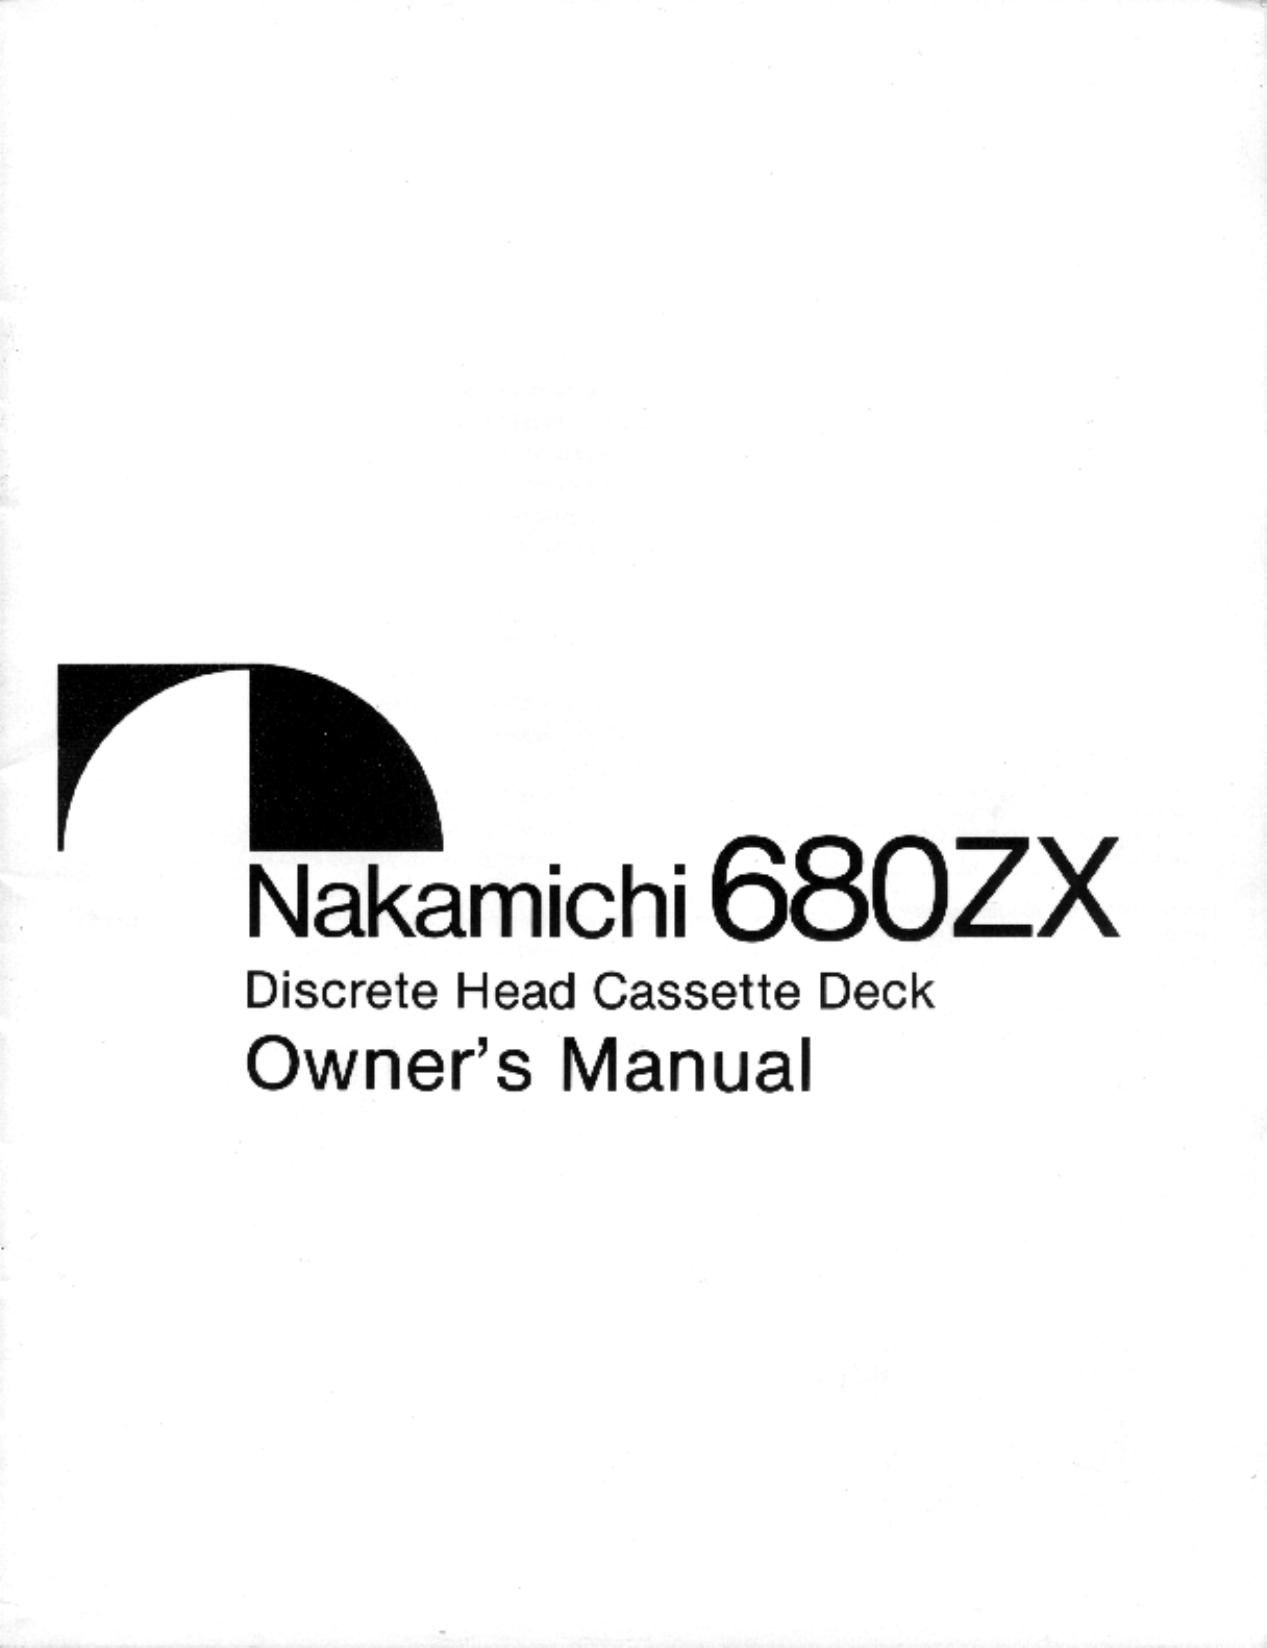 Nakamichi 680ZX Owners Manual